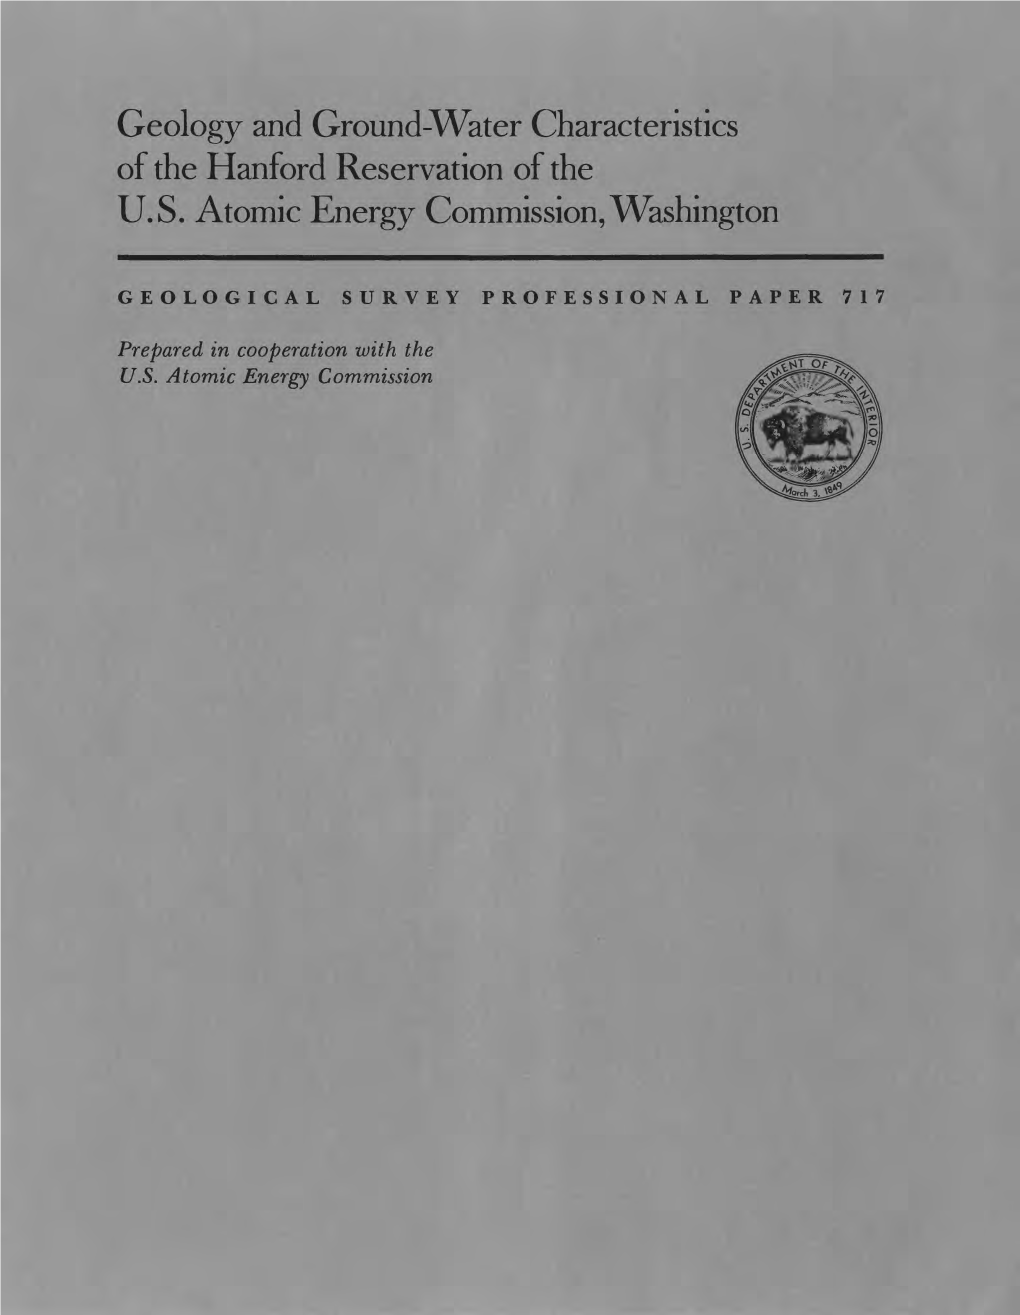 Geology and Ground-Water Characteristics of the Hanford Reservation of the U.S. Atomic Energy Commission, Washington